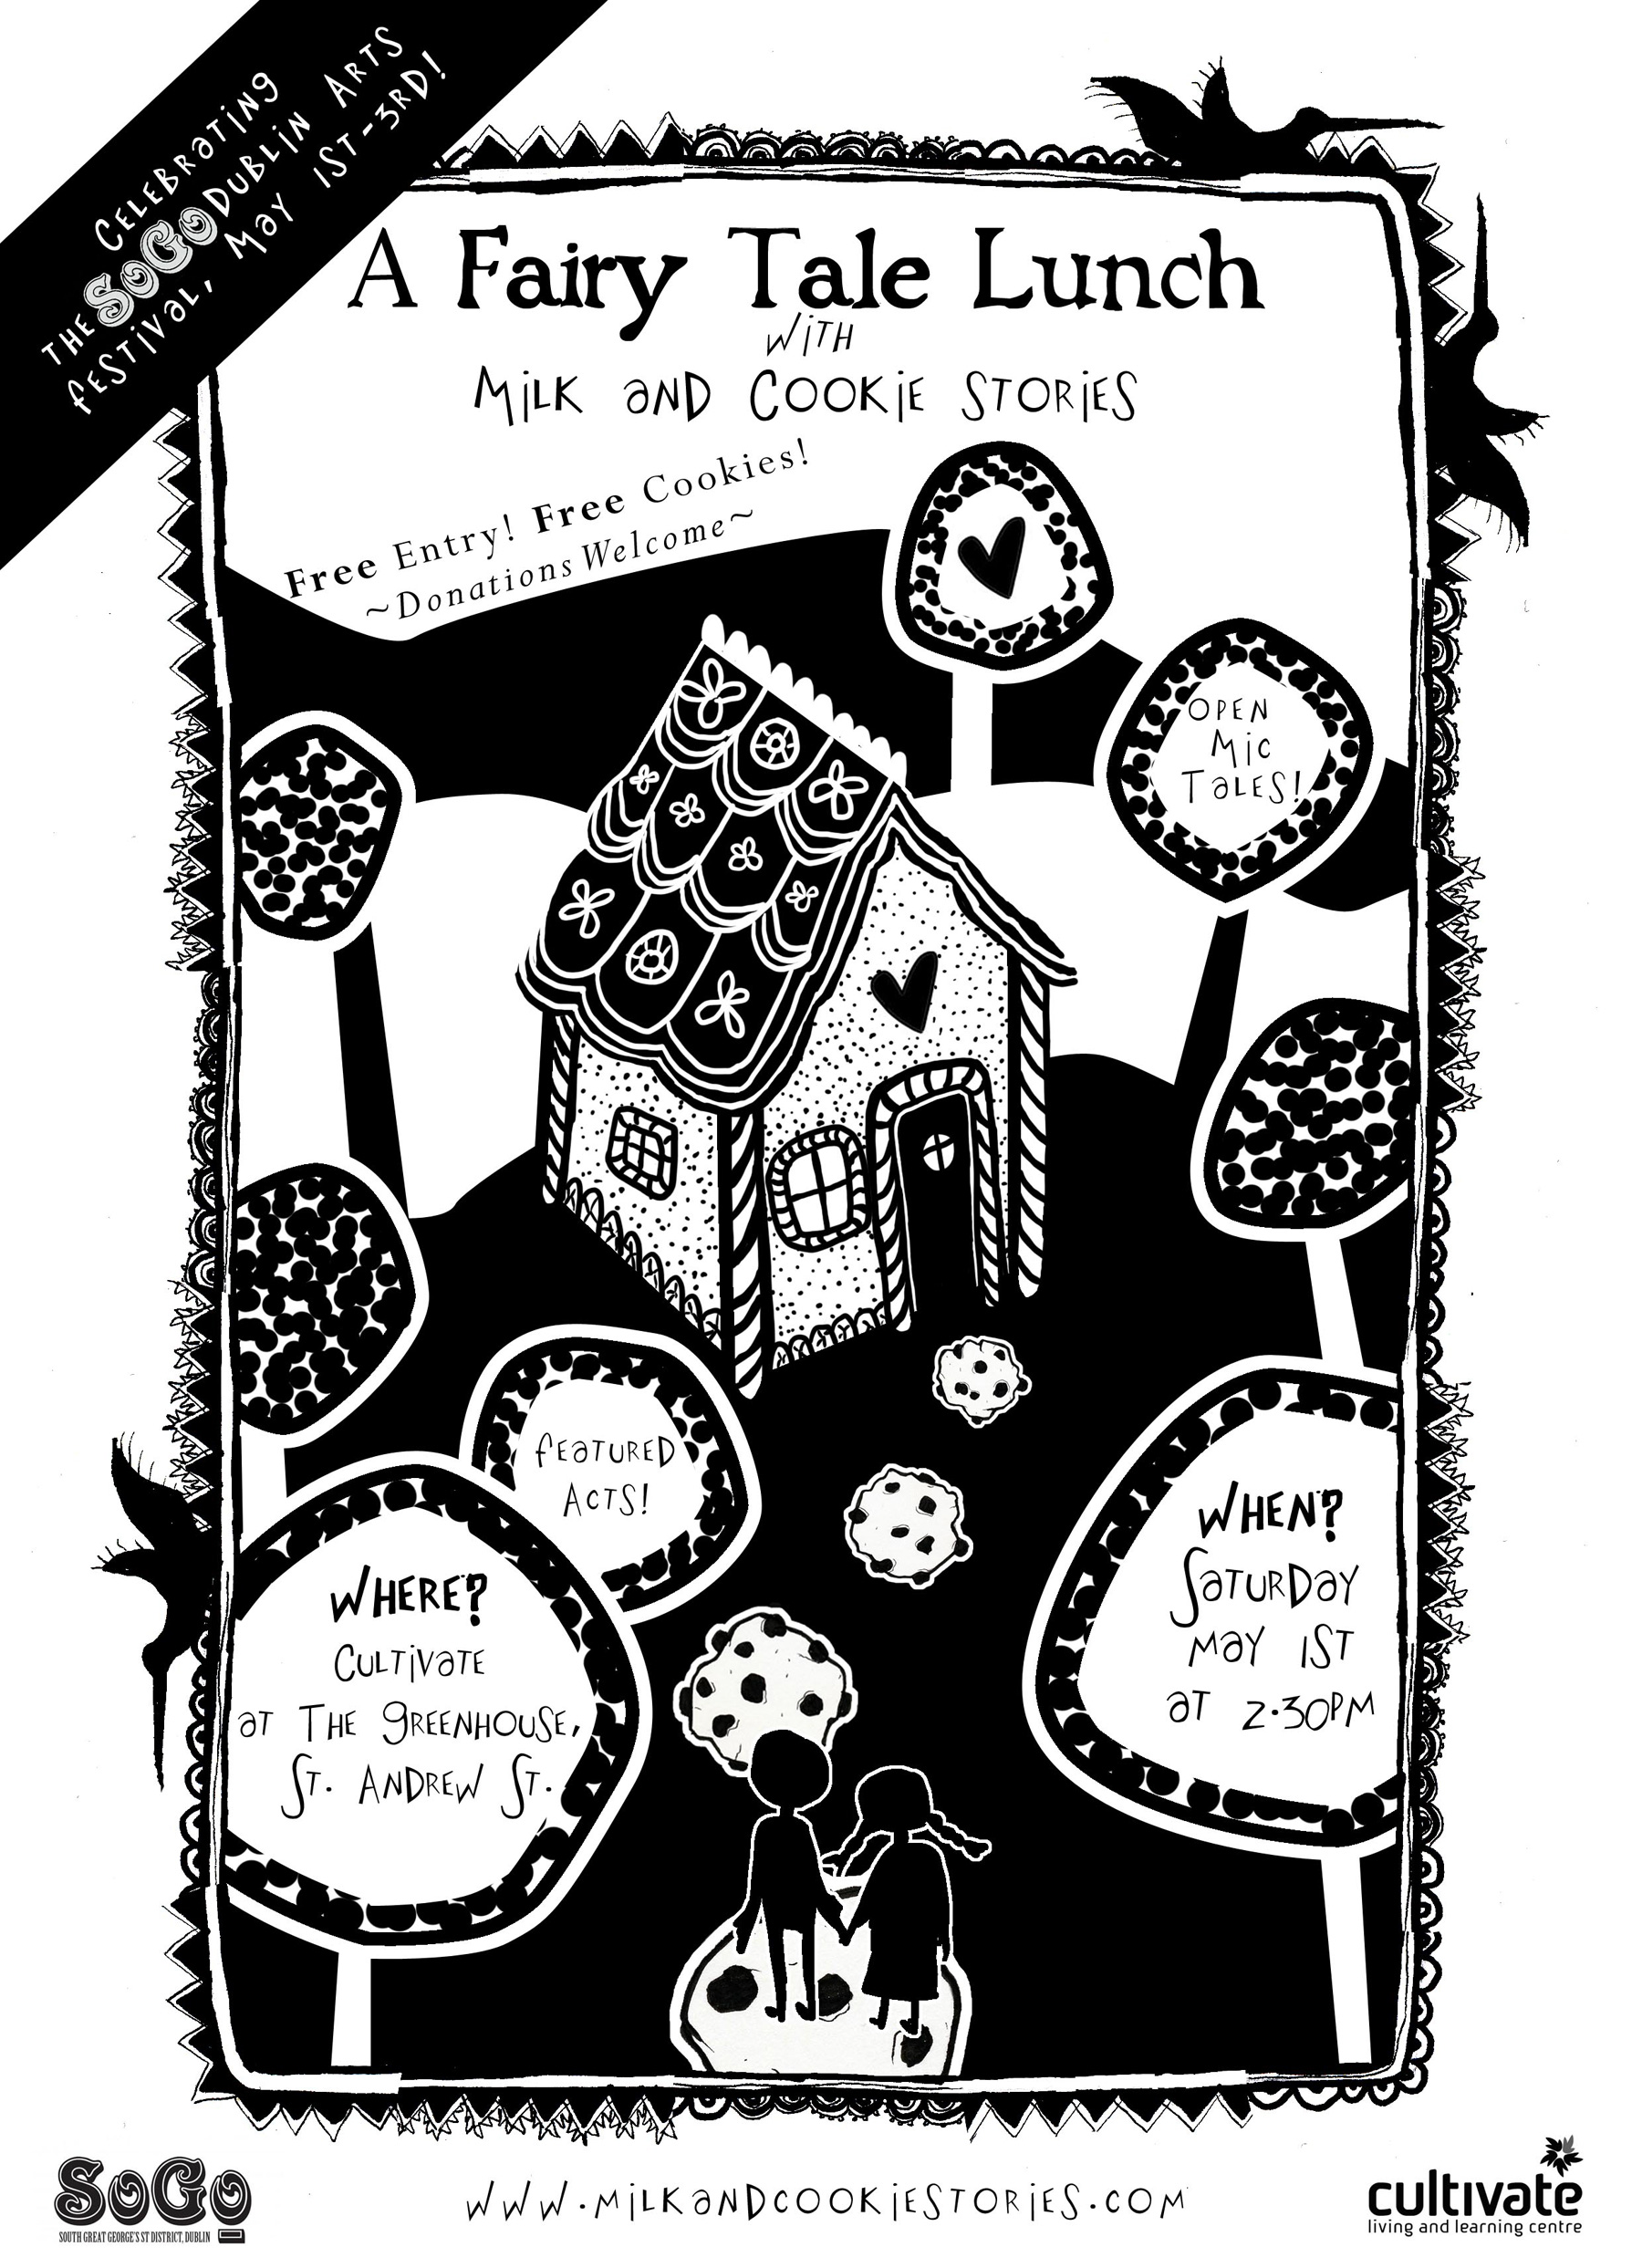 Milk and Cookie Stories flyer, back